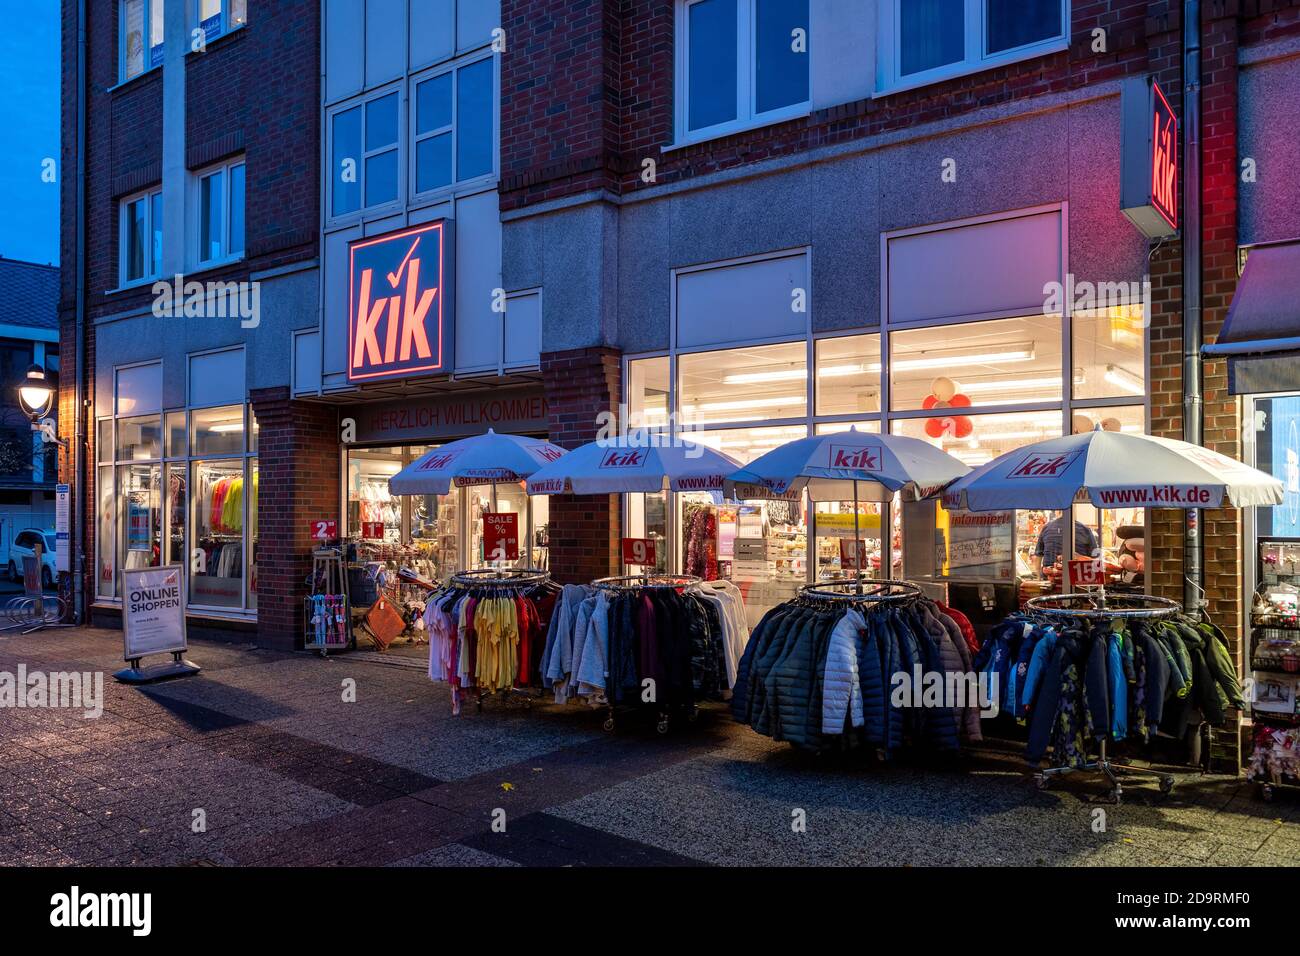 Kik branch in Cuxhaven, Germany. KiK is the largest textile discounter  chain in Germany and operates about 3,500 stores across Europe Stock Photo  - Alamy